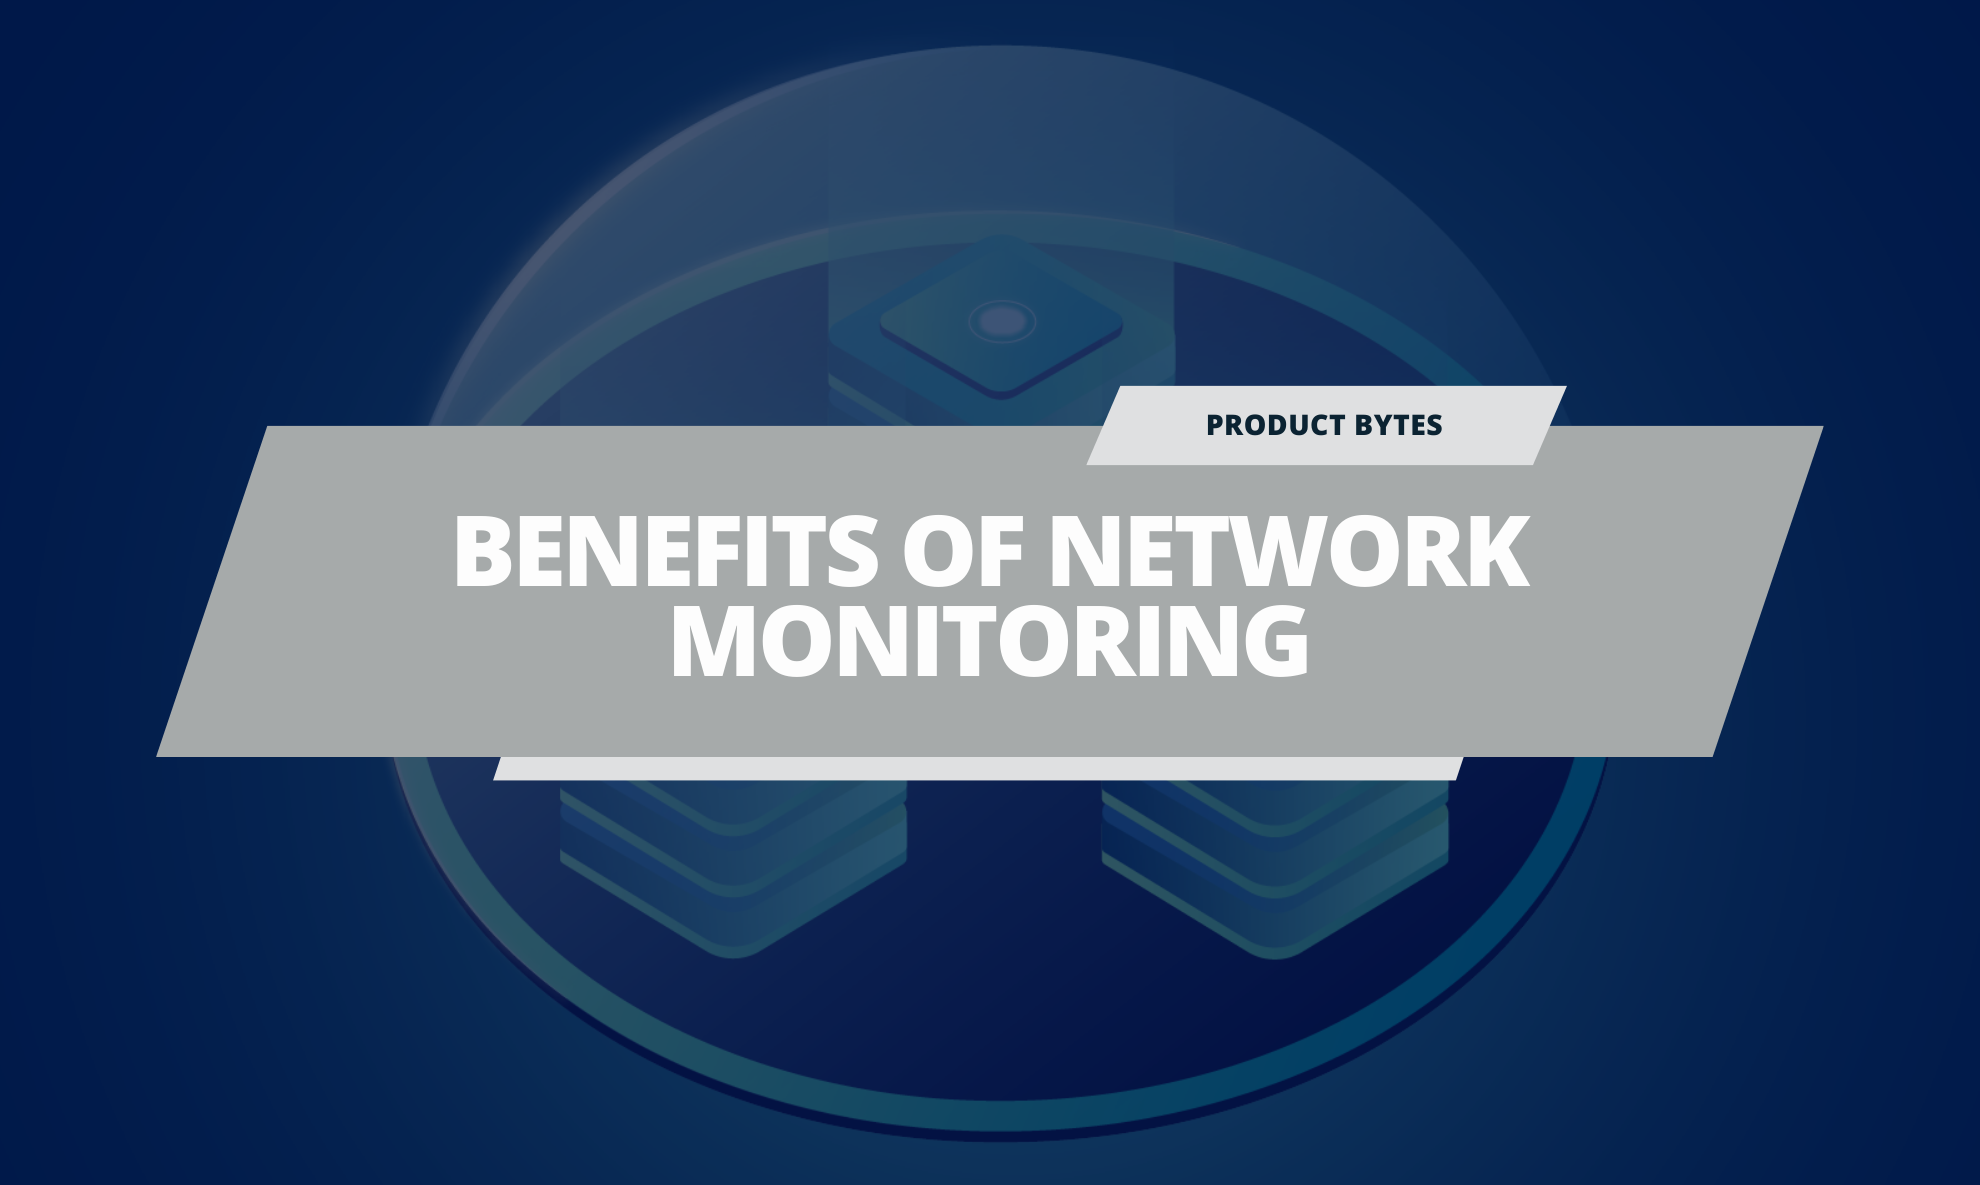 Benefits of network monitoring, including examples 